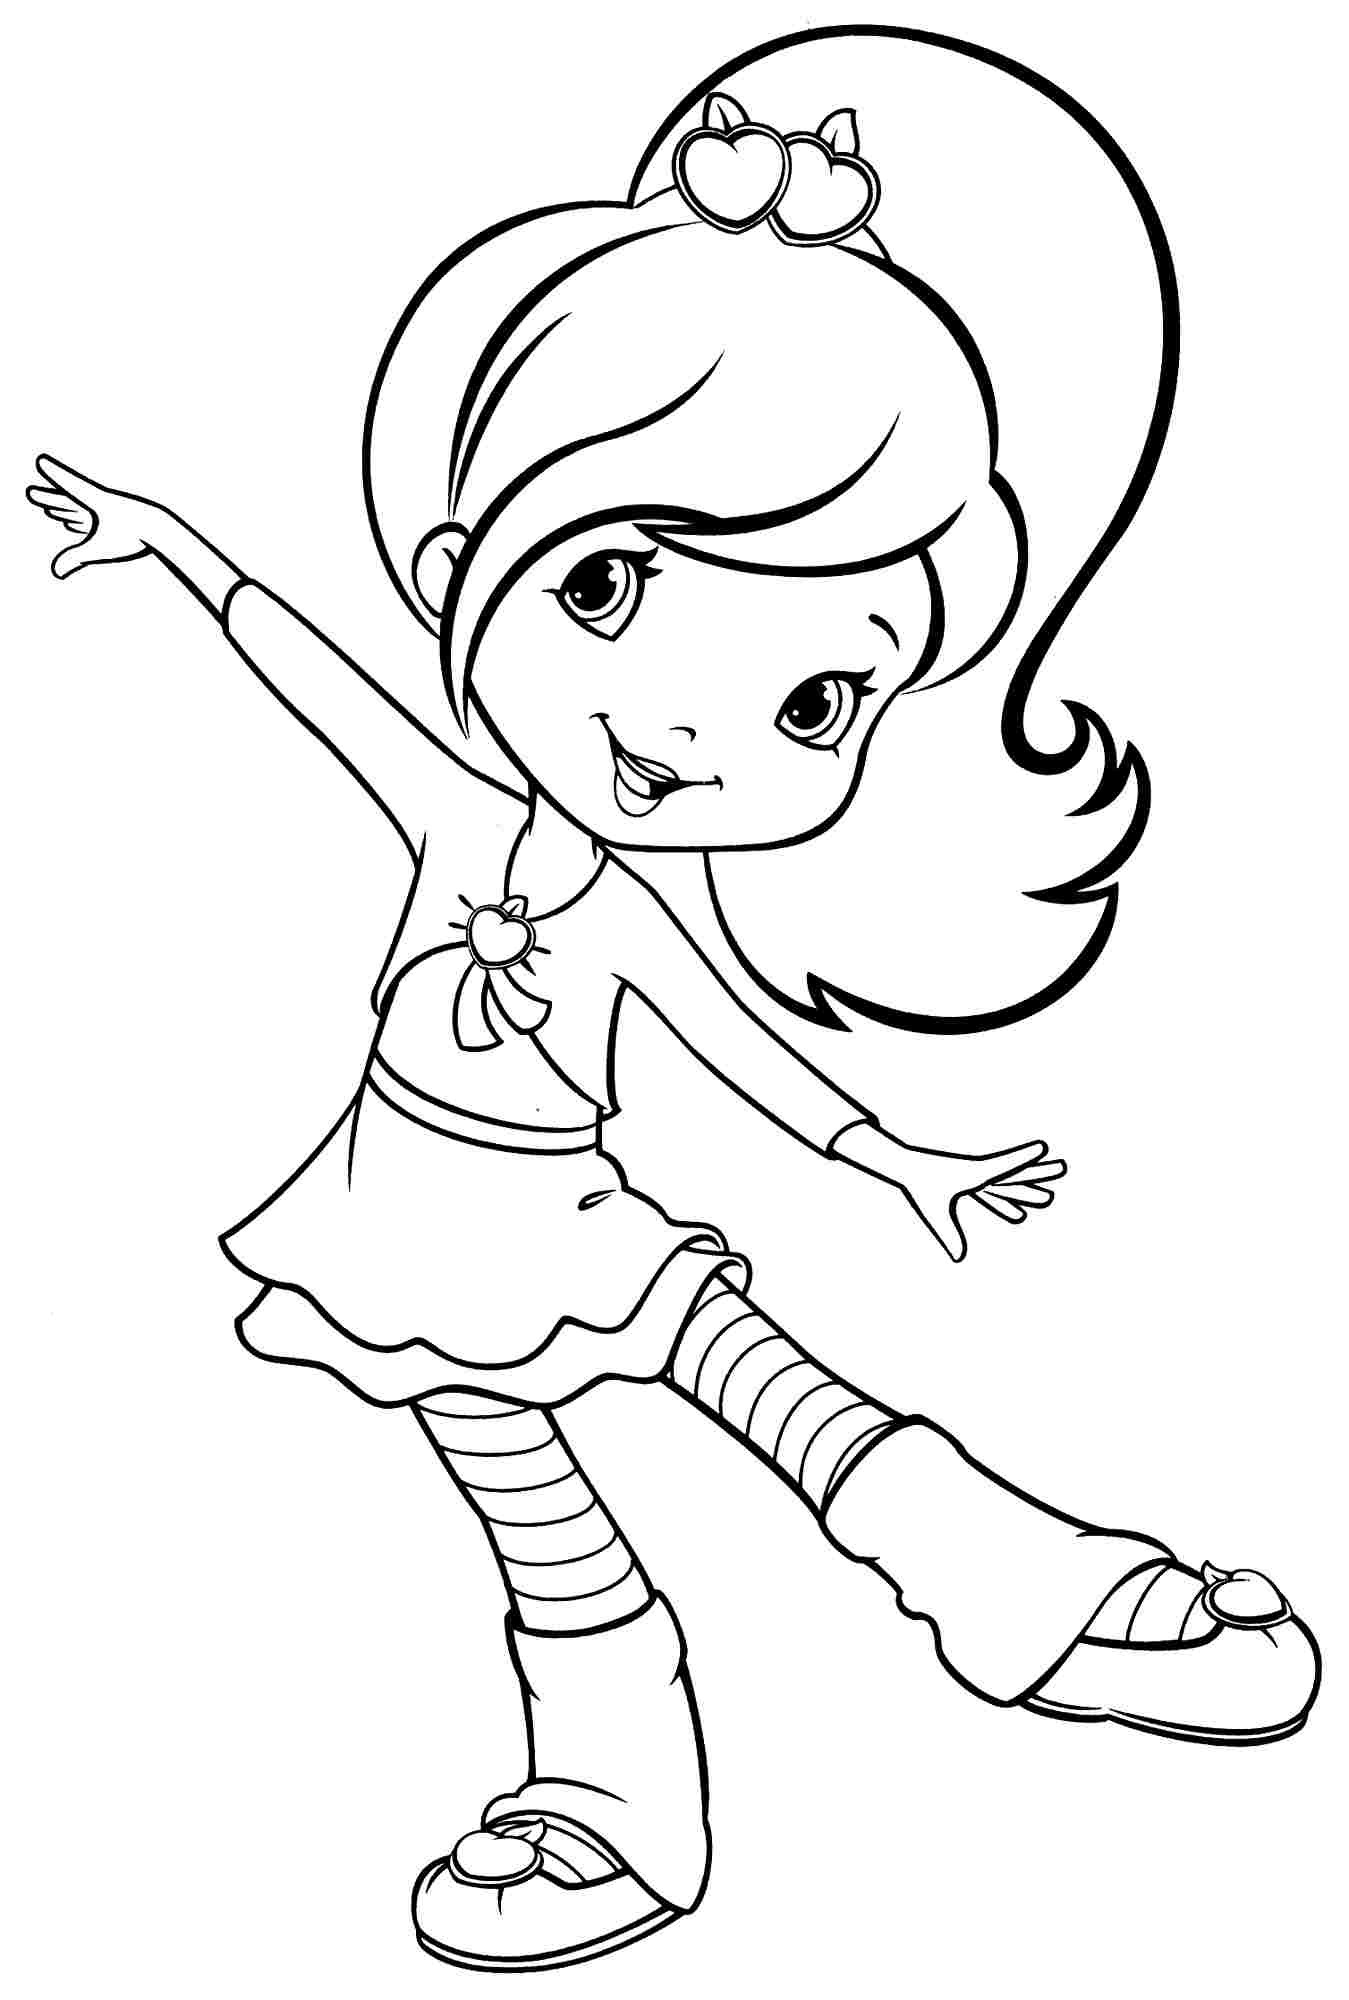 Coloring Pages Of Girls
 Coloring Pages for Girls Best Coloring Pages For Kids